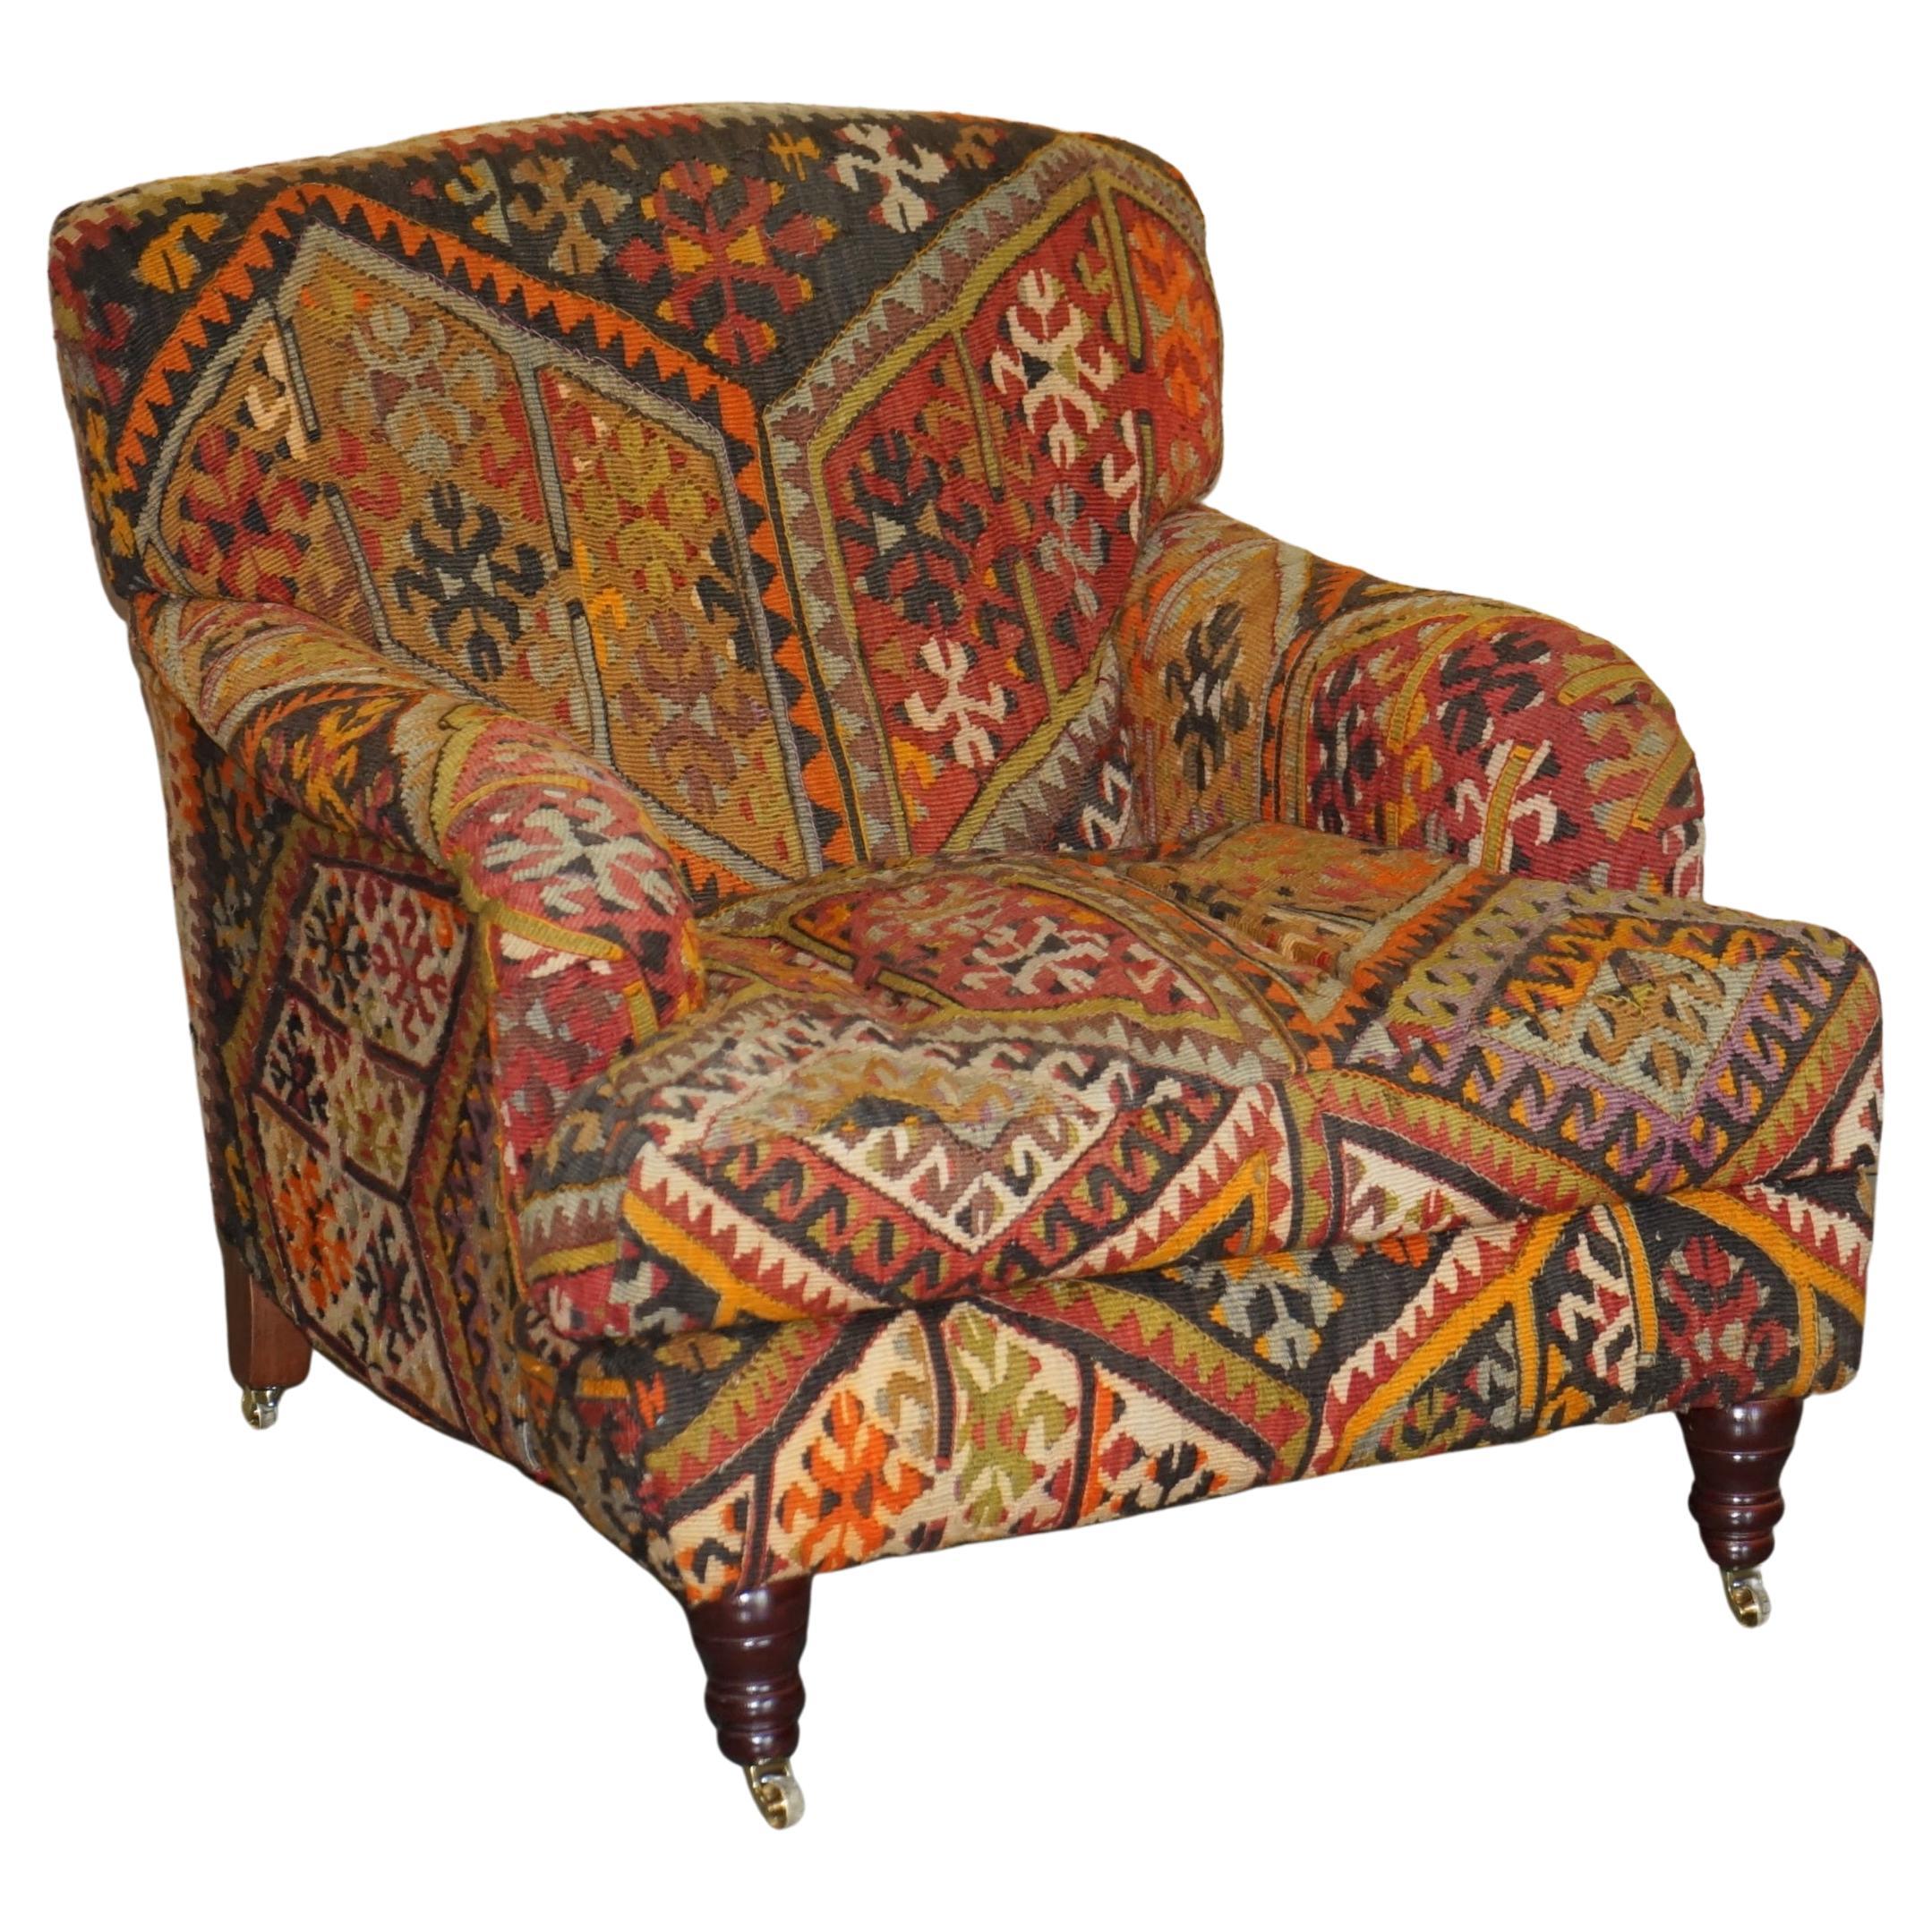 Vintage George Smith Kilim Upholstered Armchair with Feather Cushion